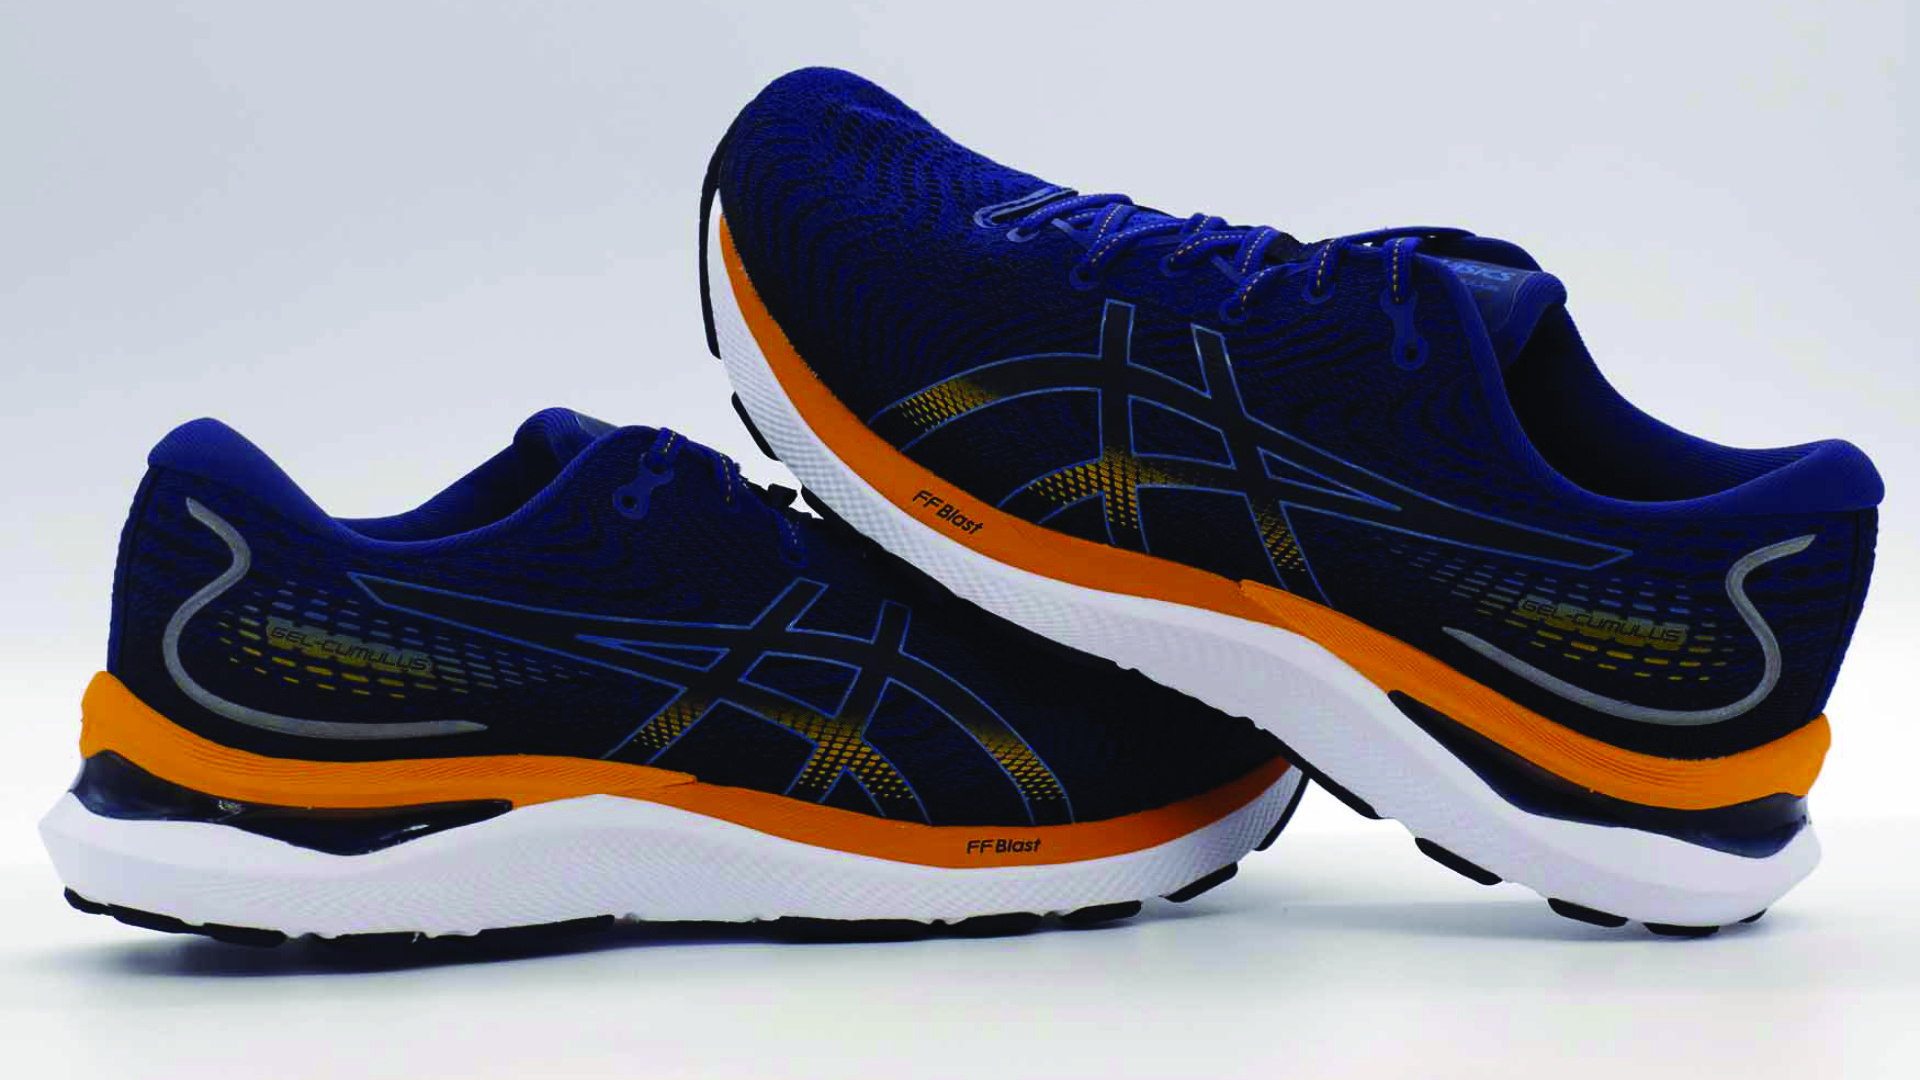 A pair of Asics Gel Cumulus 24 running shoes, designed with gel cushioning systems that absorb shock and promote proper foot alignment, perfect for improving posture and reducing knee pain as recommended by shoefit.uk.